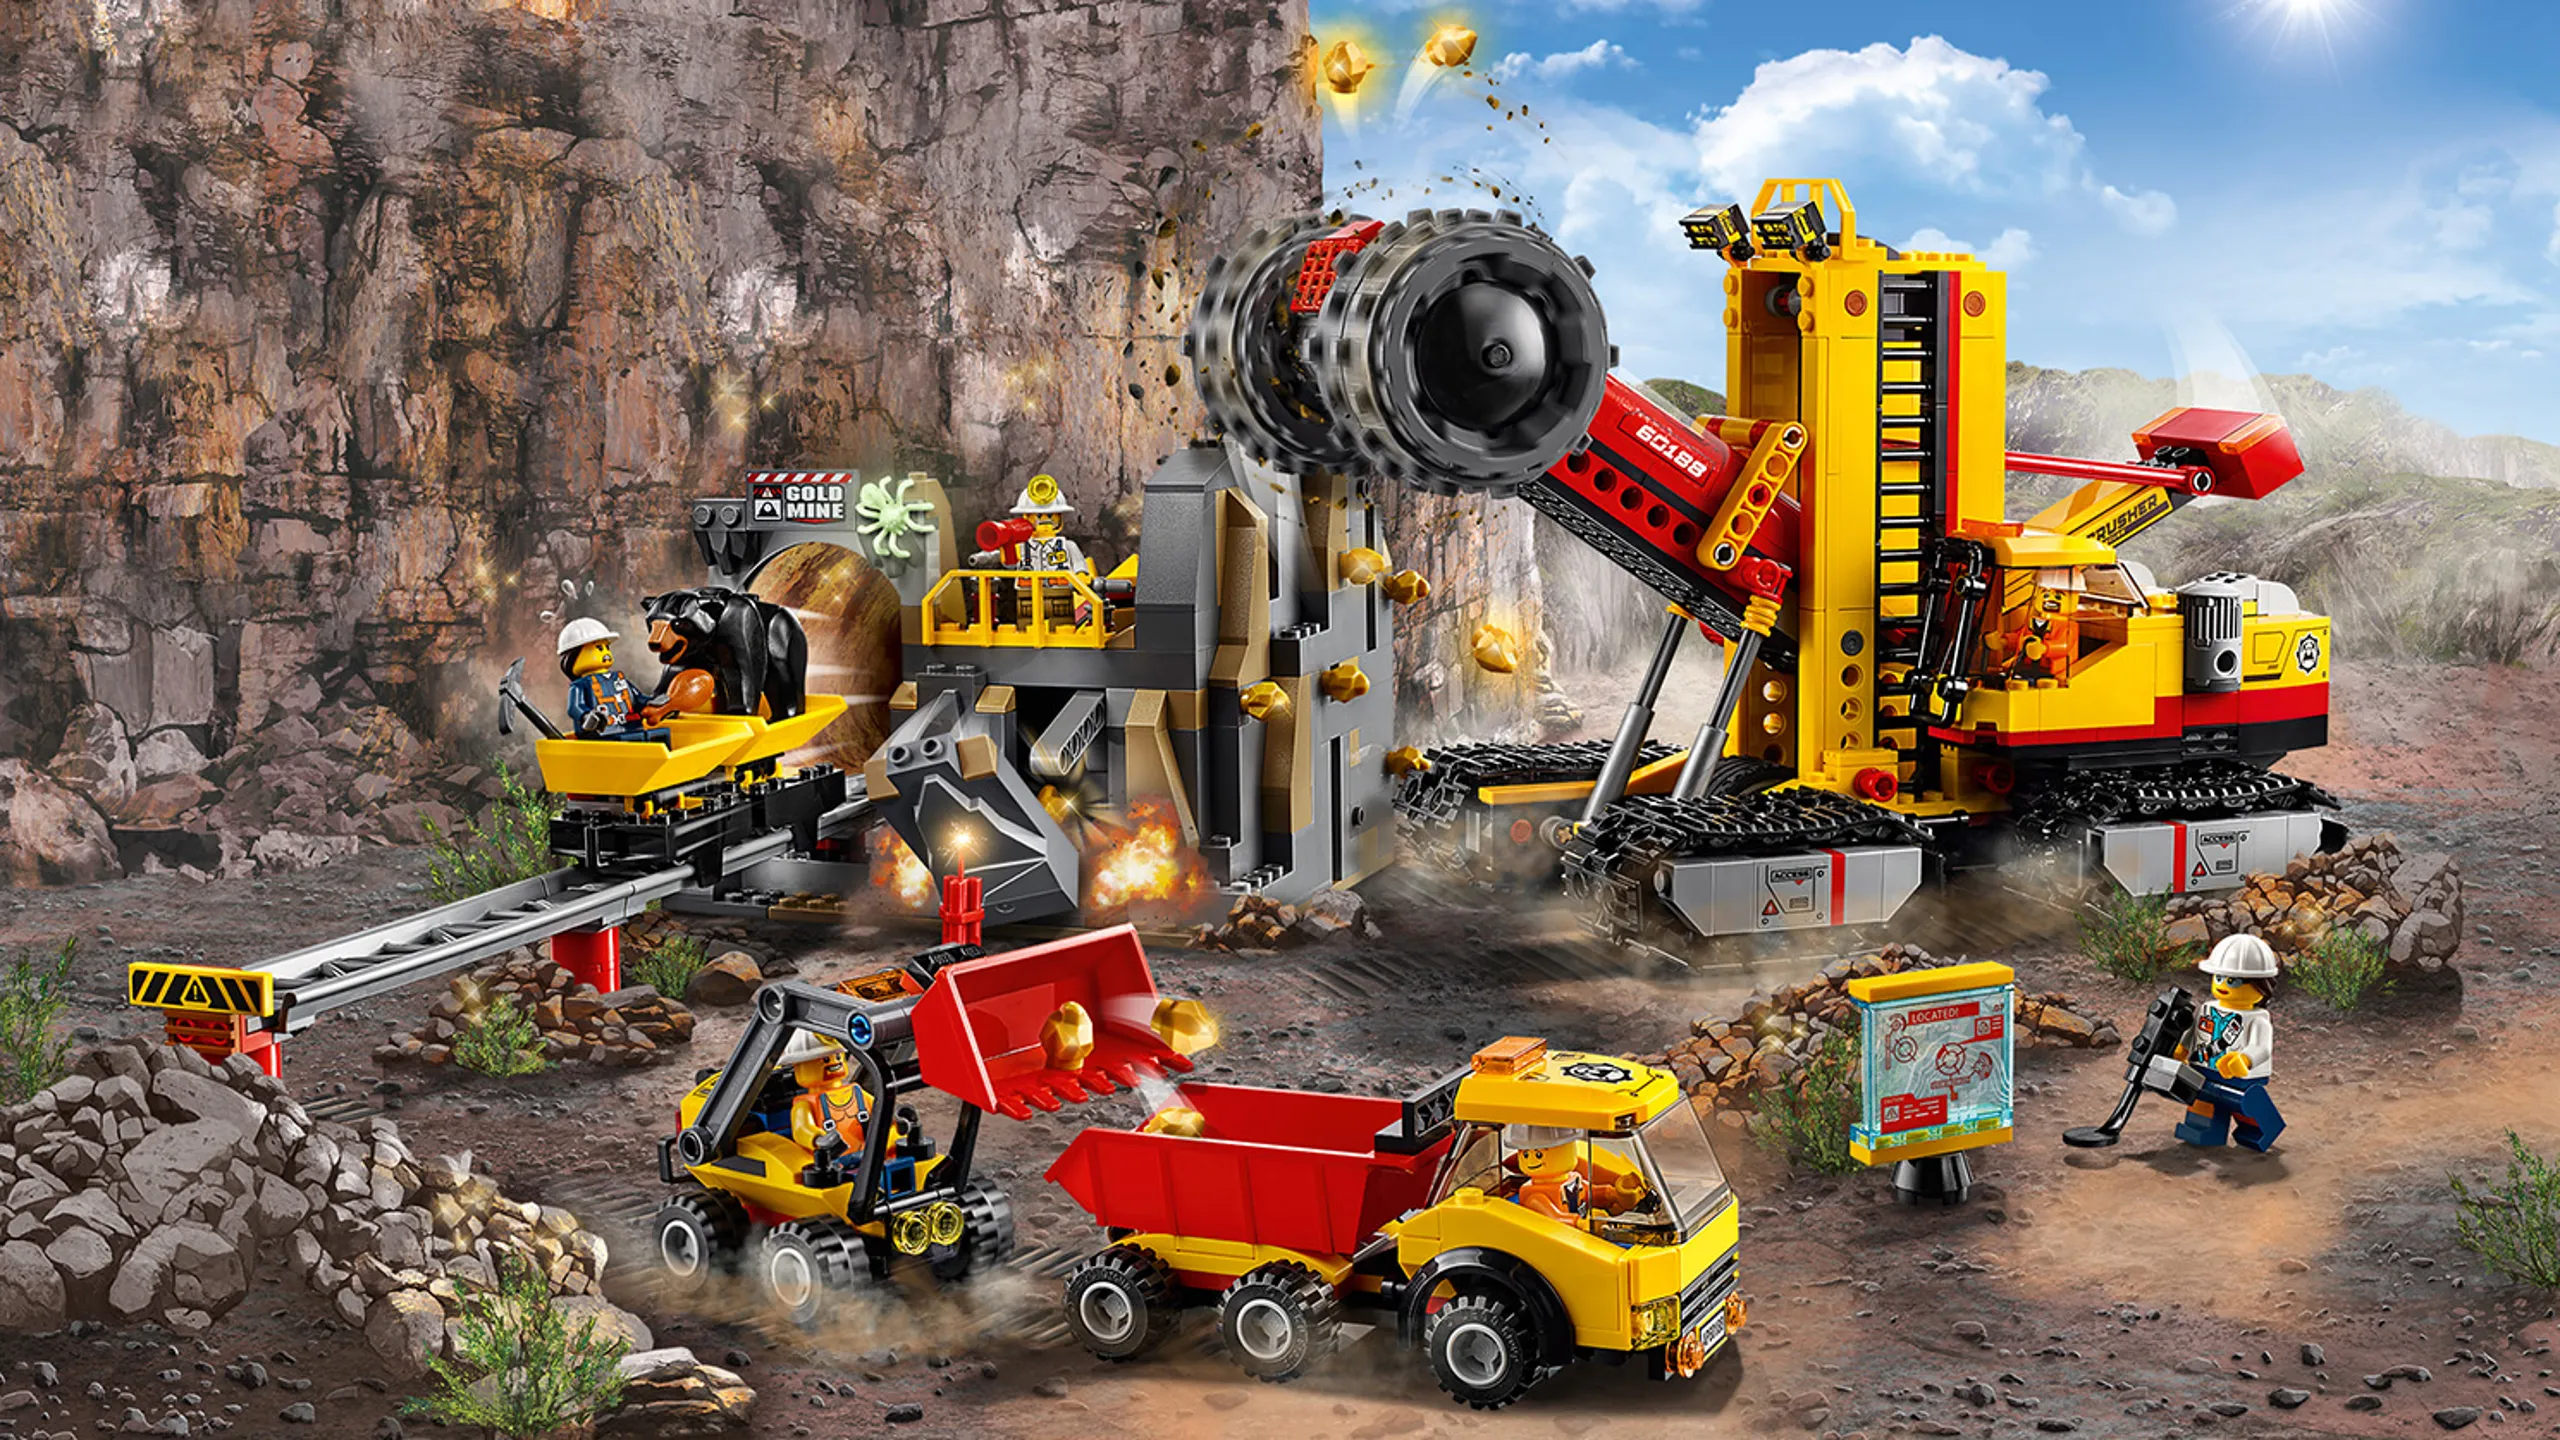 LEGO City Mining - 60188 Mining Experts Site - The workers in the mine use all their machines and vehicles to find hidden gold.